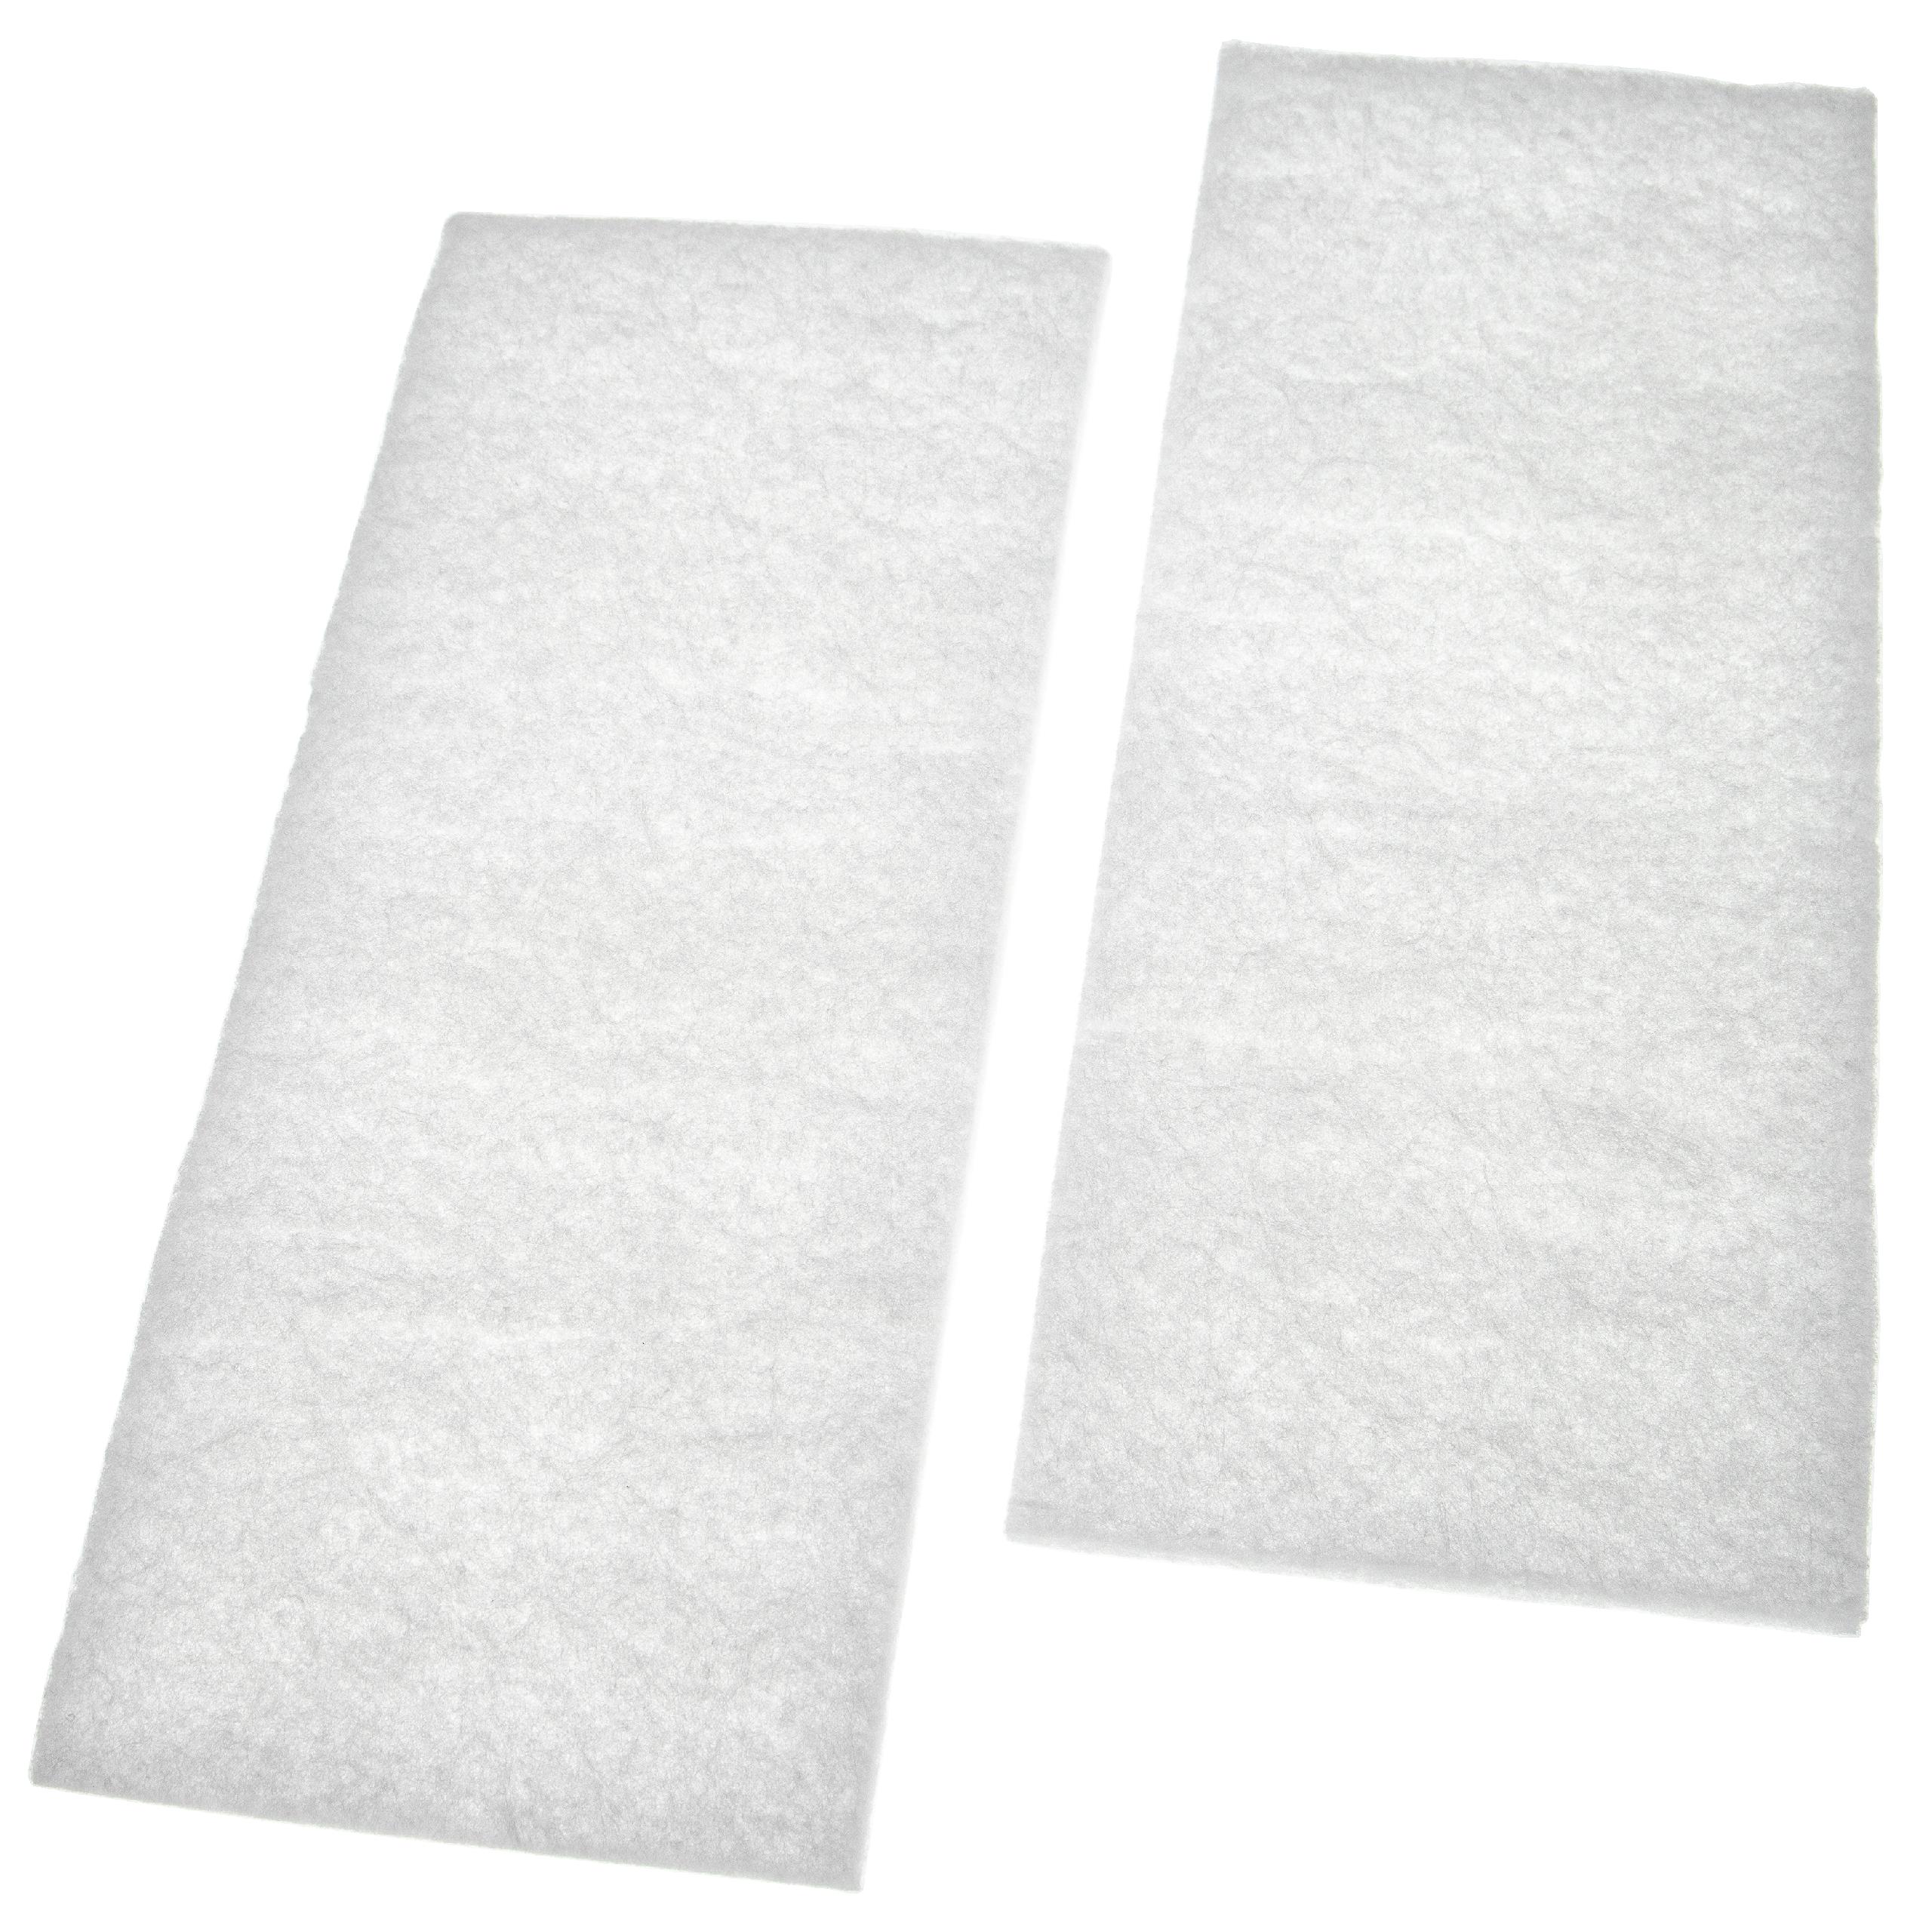 2x Filter G4 suitable for Vallox ValloPlus 450 SC Air Ventilation Device - Coarse Dust Filters